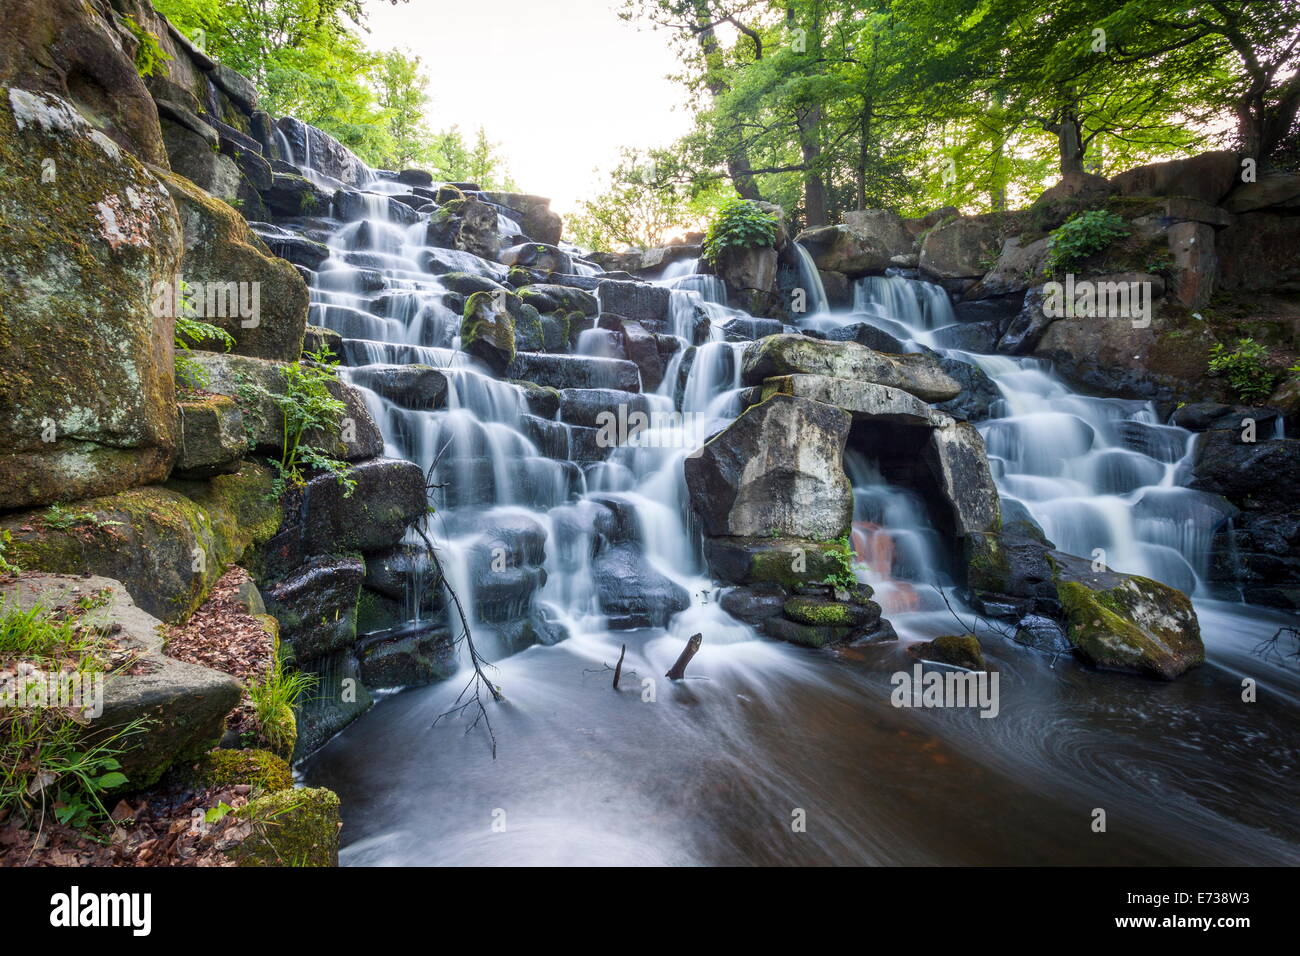 Les Cascades, Virginia Water, Surrey, Angleterre, Royaume-Uni, Europe Banque D'Images